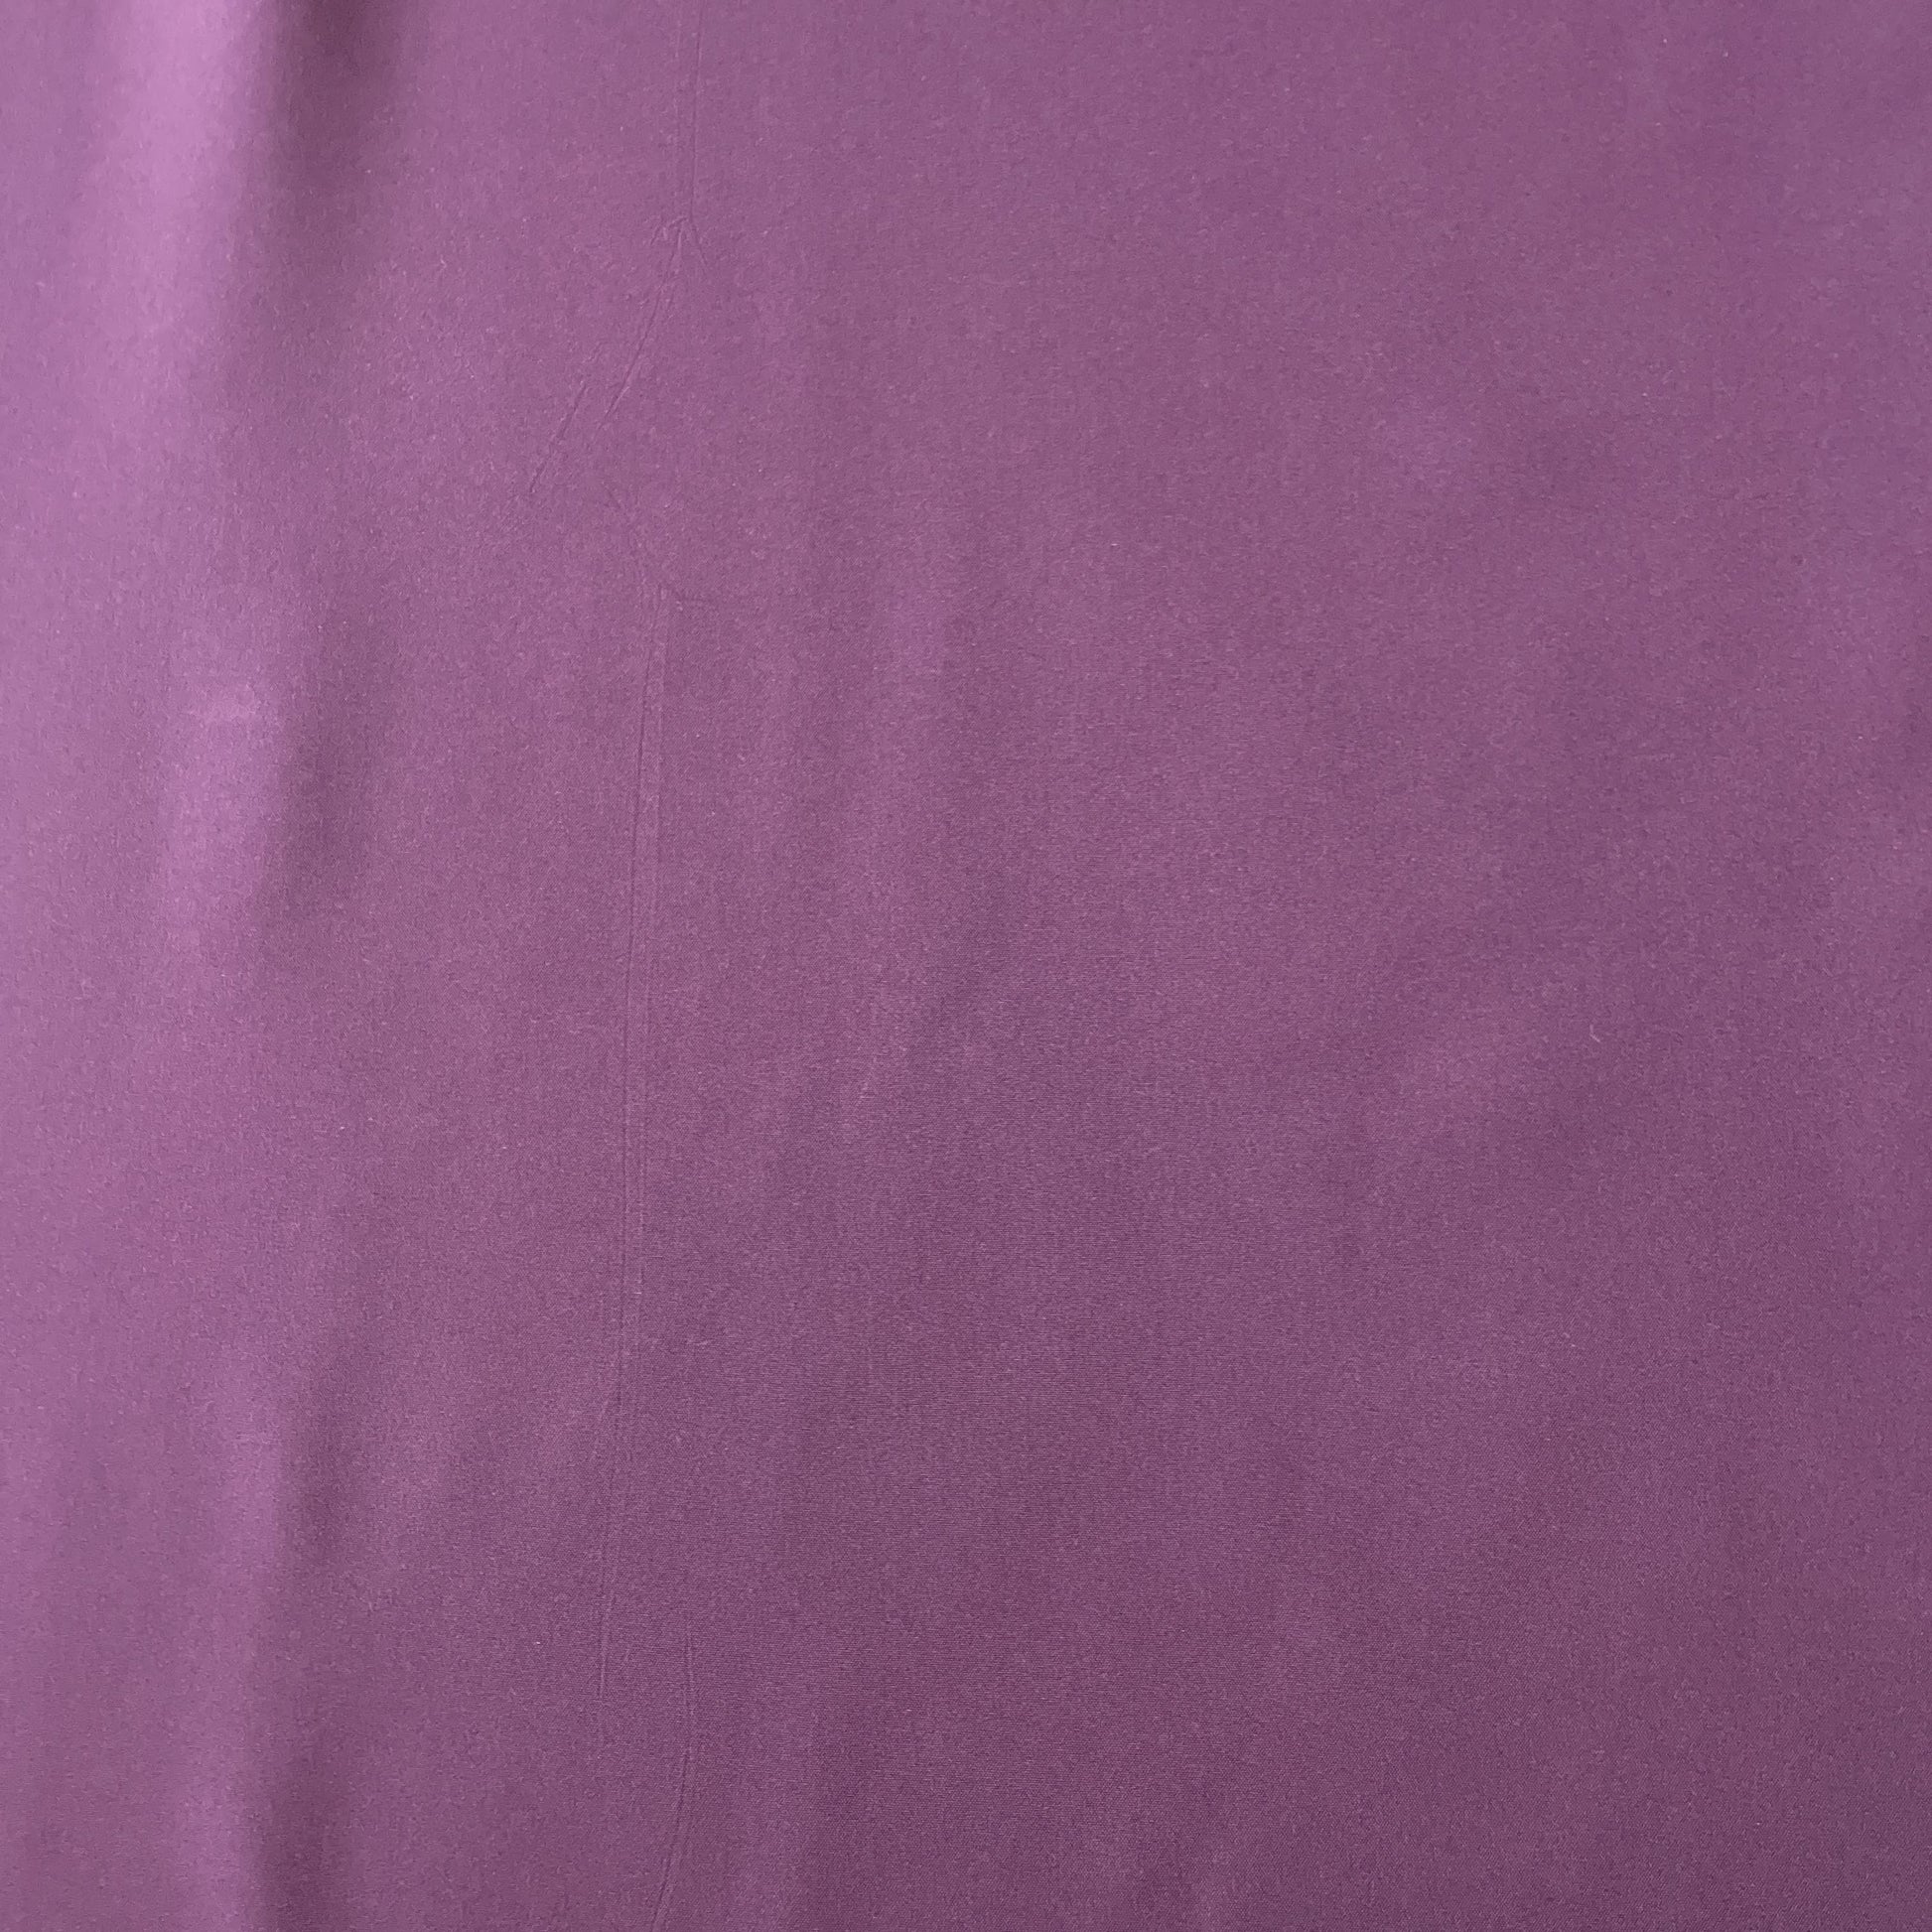 Light Purple Solid Butter Crepe Fabric